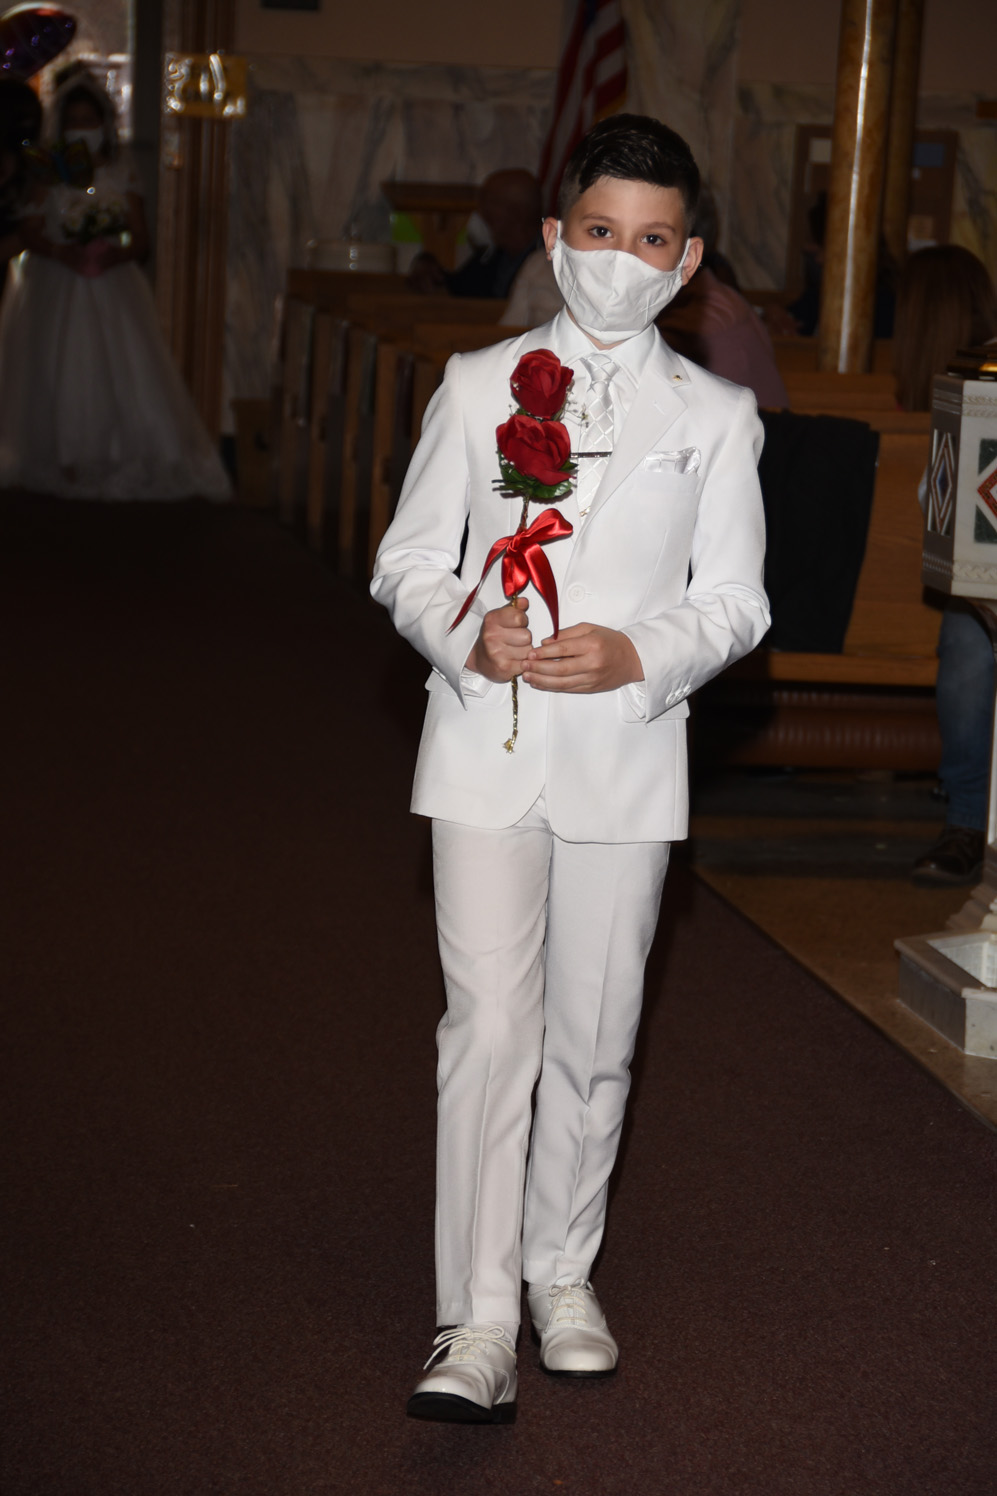 FIRST-COMMUNION-MAY-2-2021-1001001190